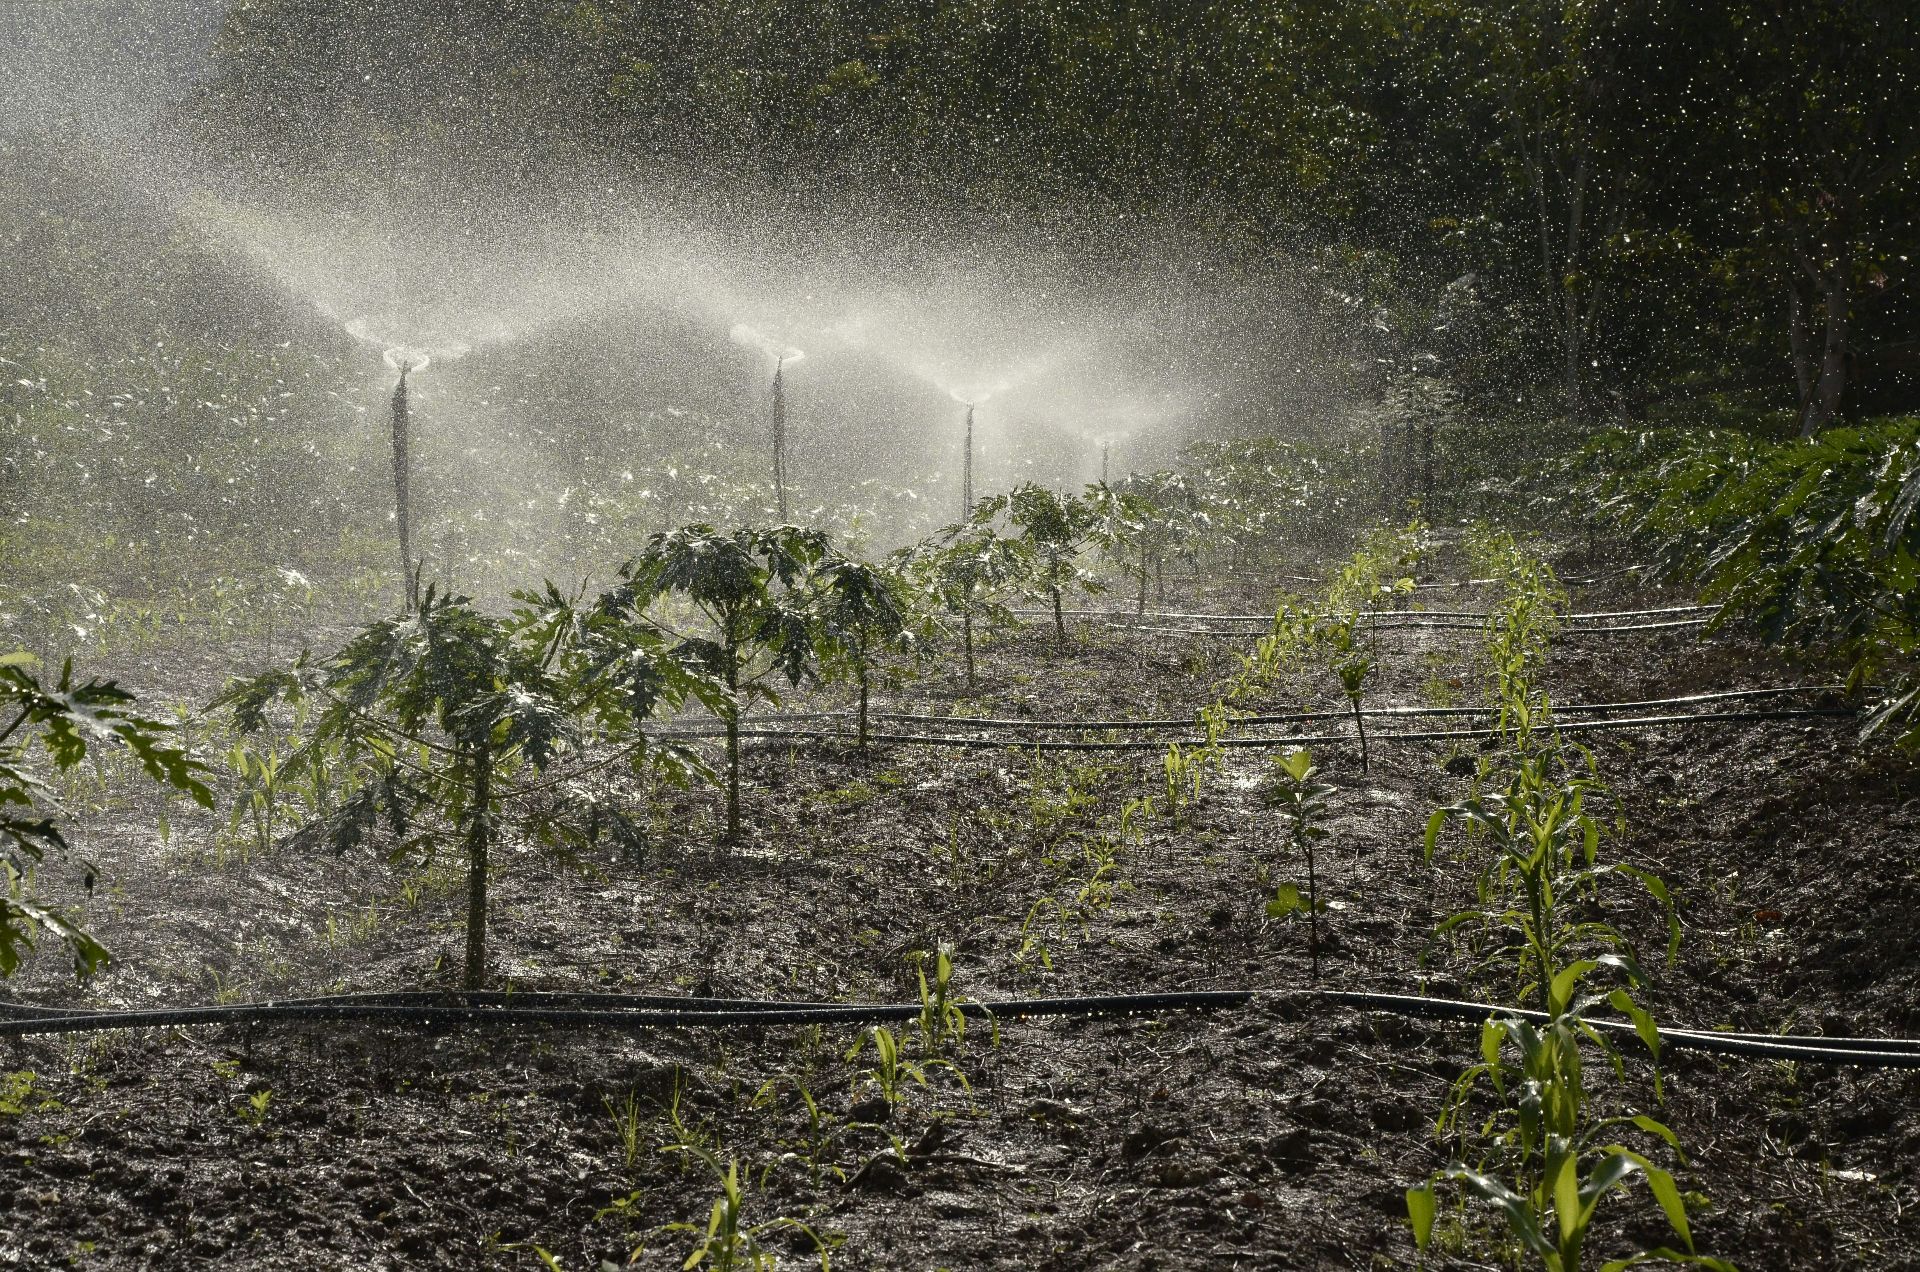 Plantation watered with water using sprinklers